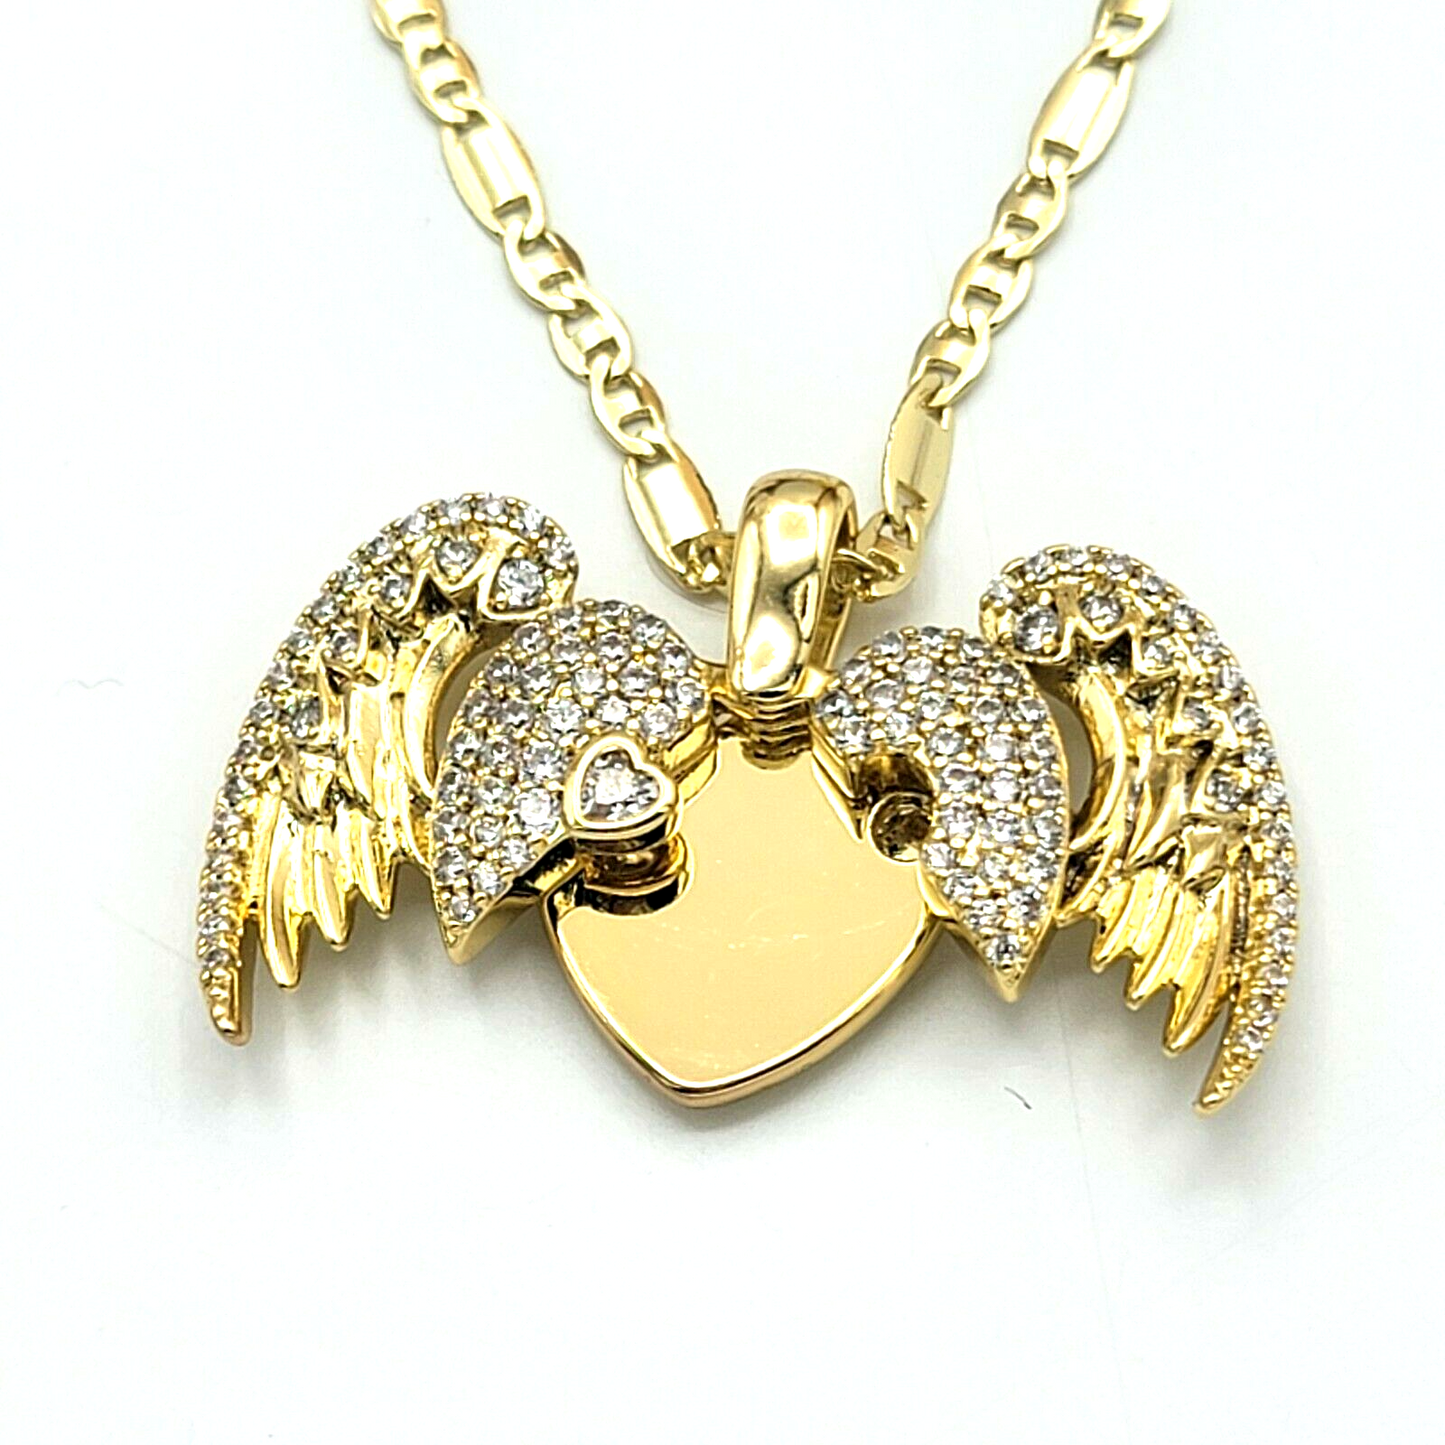 Necklaces - 14K Gold Plated. Crystal Icy HEART w WINGS Pendant & Chain.